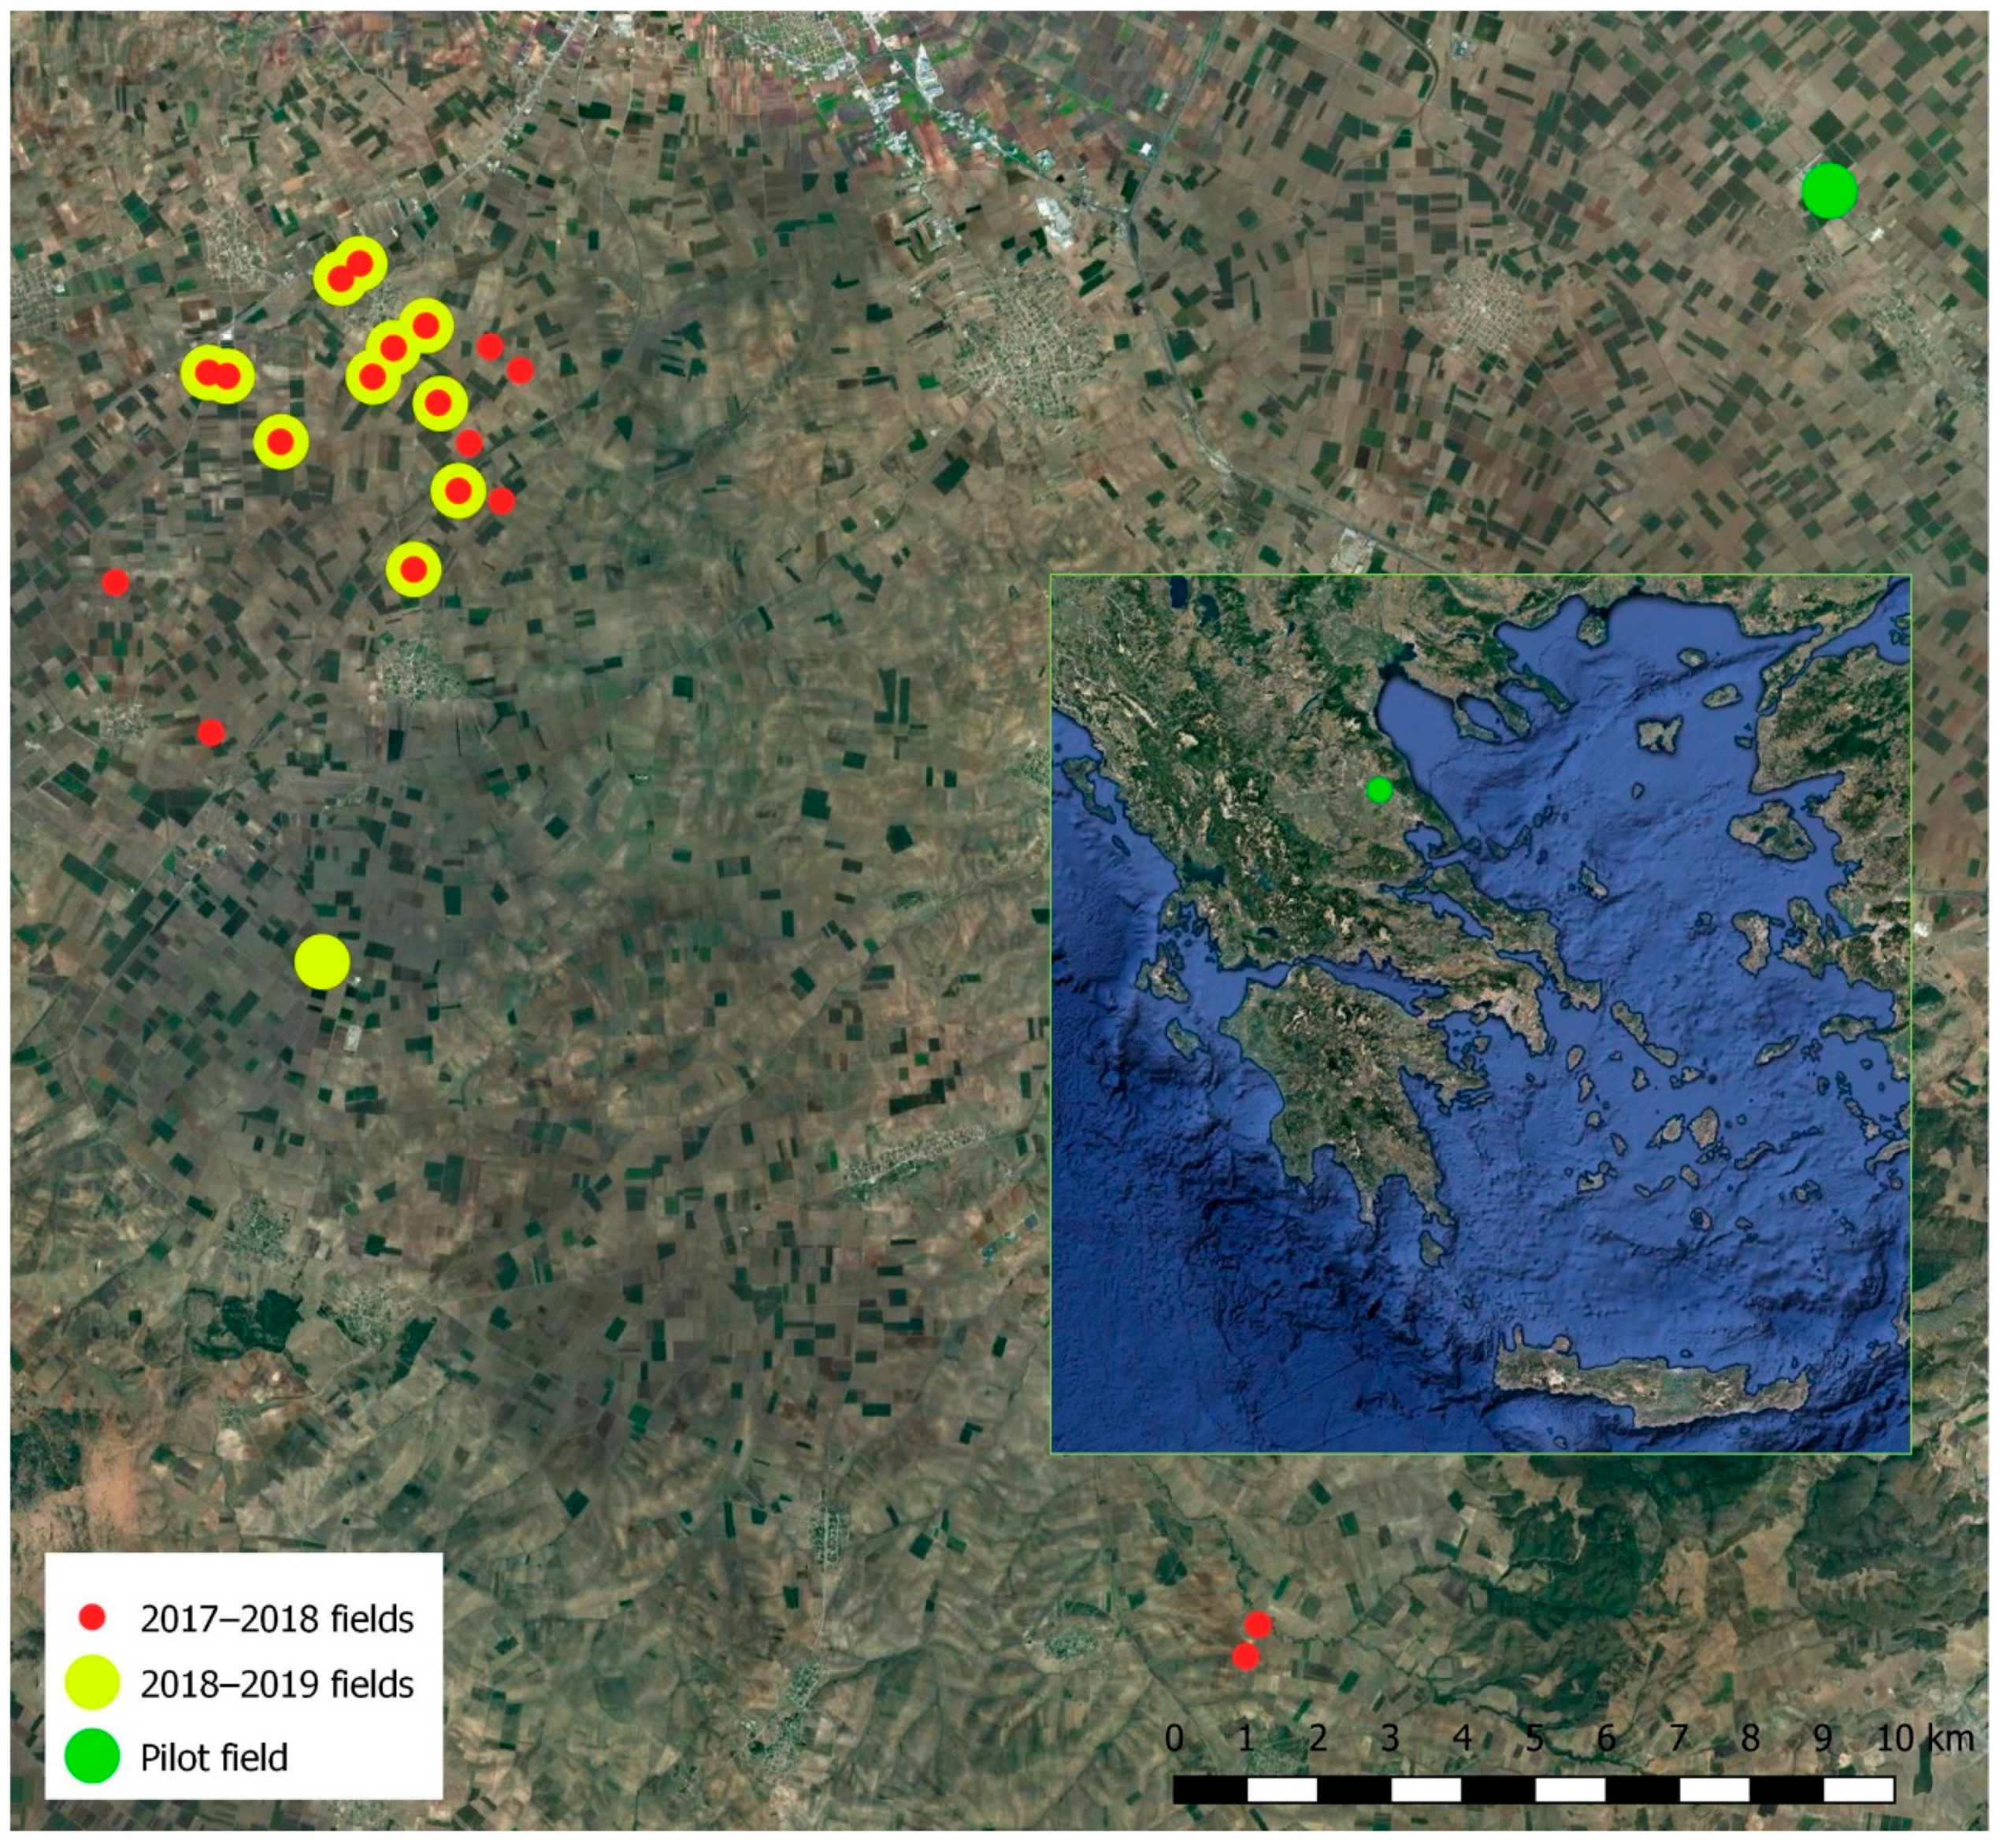 Agronomy | Free Full-Text | Modeling of Durum Wheat Yield Based on  Sentinel-2 Imagery